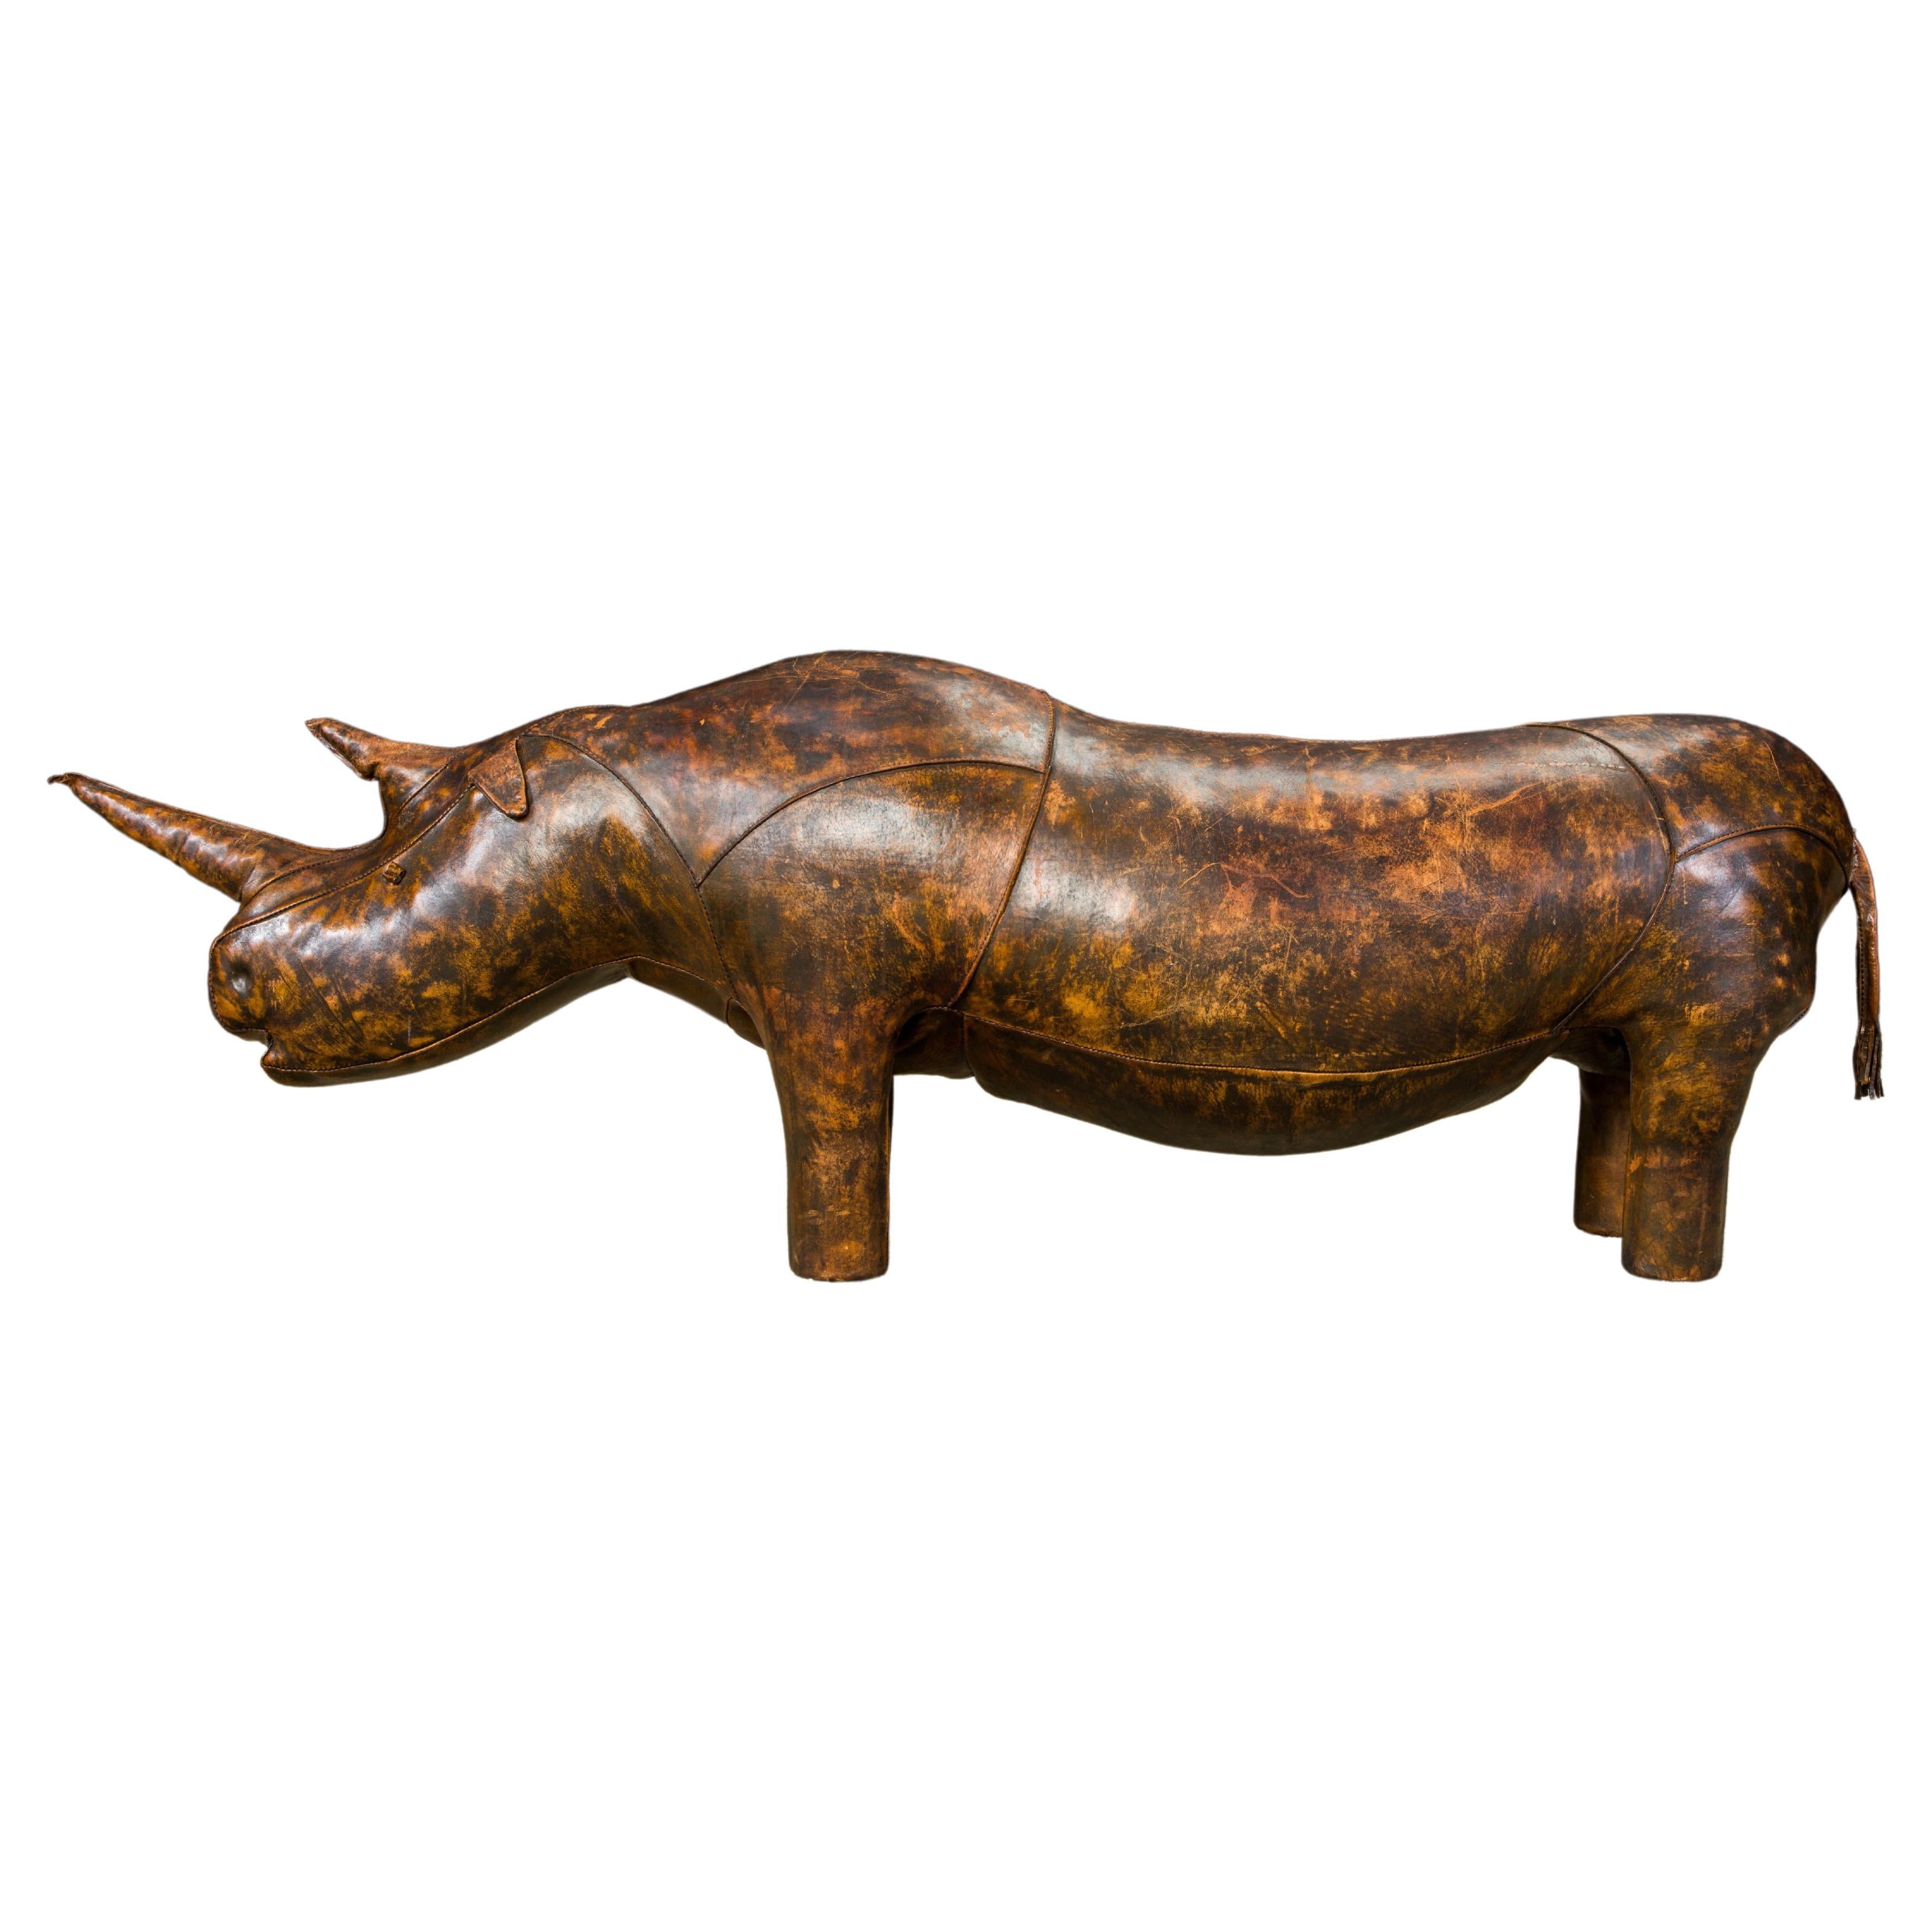 77" Leather 'Superking' Rhino by Dimitri Omersa for Abercrombie & Fitch, Signed For Sale